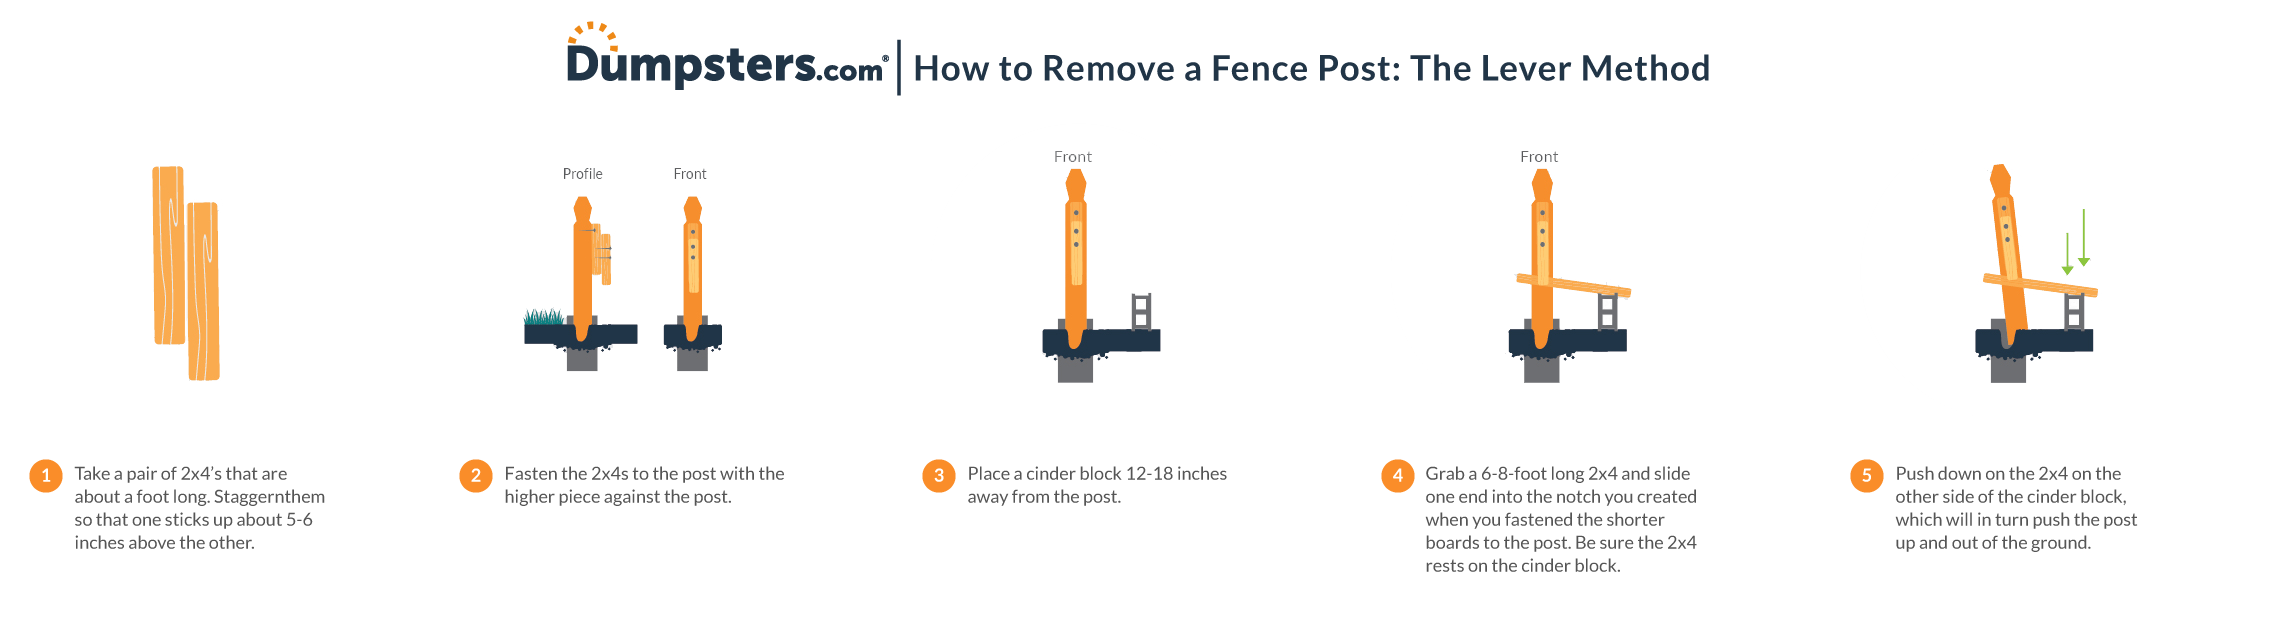 Lever method step-by-step guide to removing an old fence.